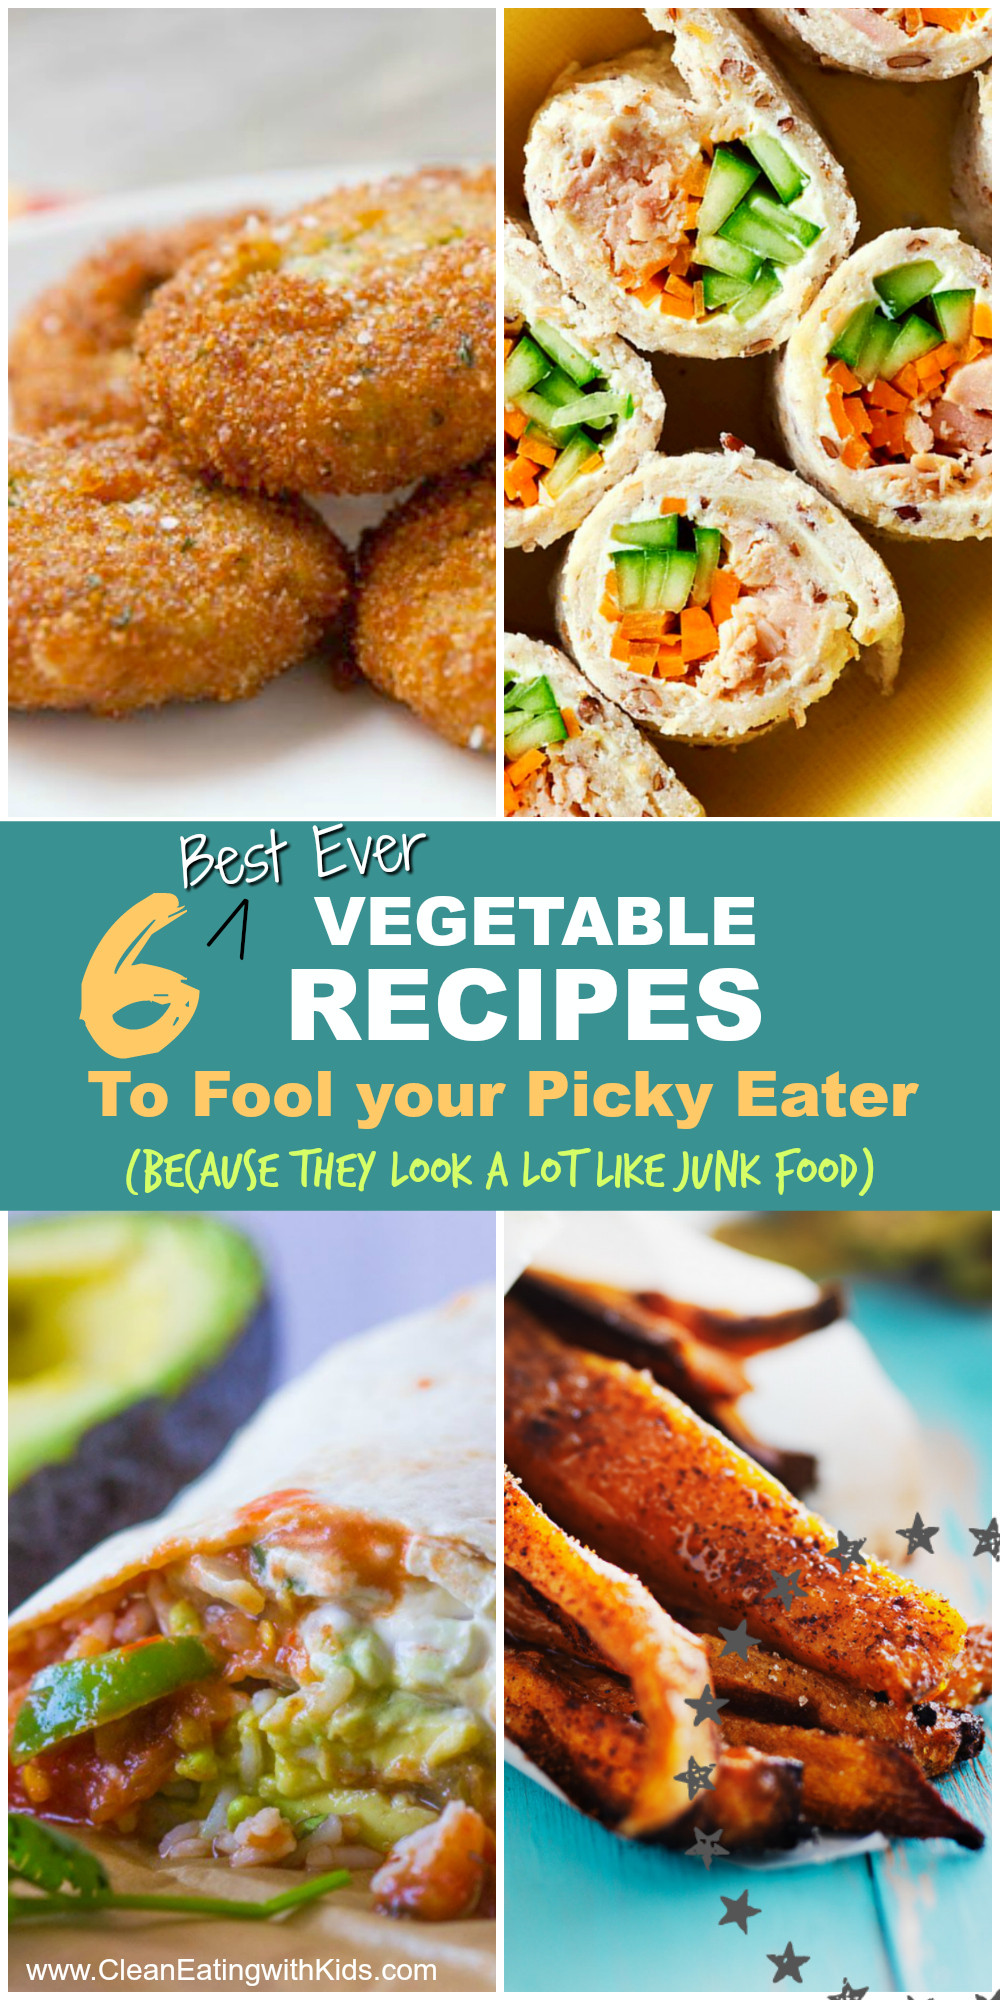 Recipes For Picky Kids
 6 Best Ve able Recipes to Fool Your Picky Eater Clean